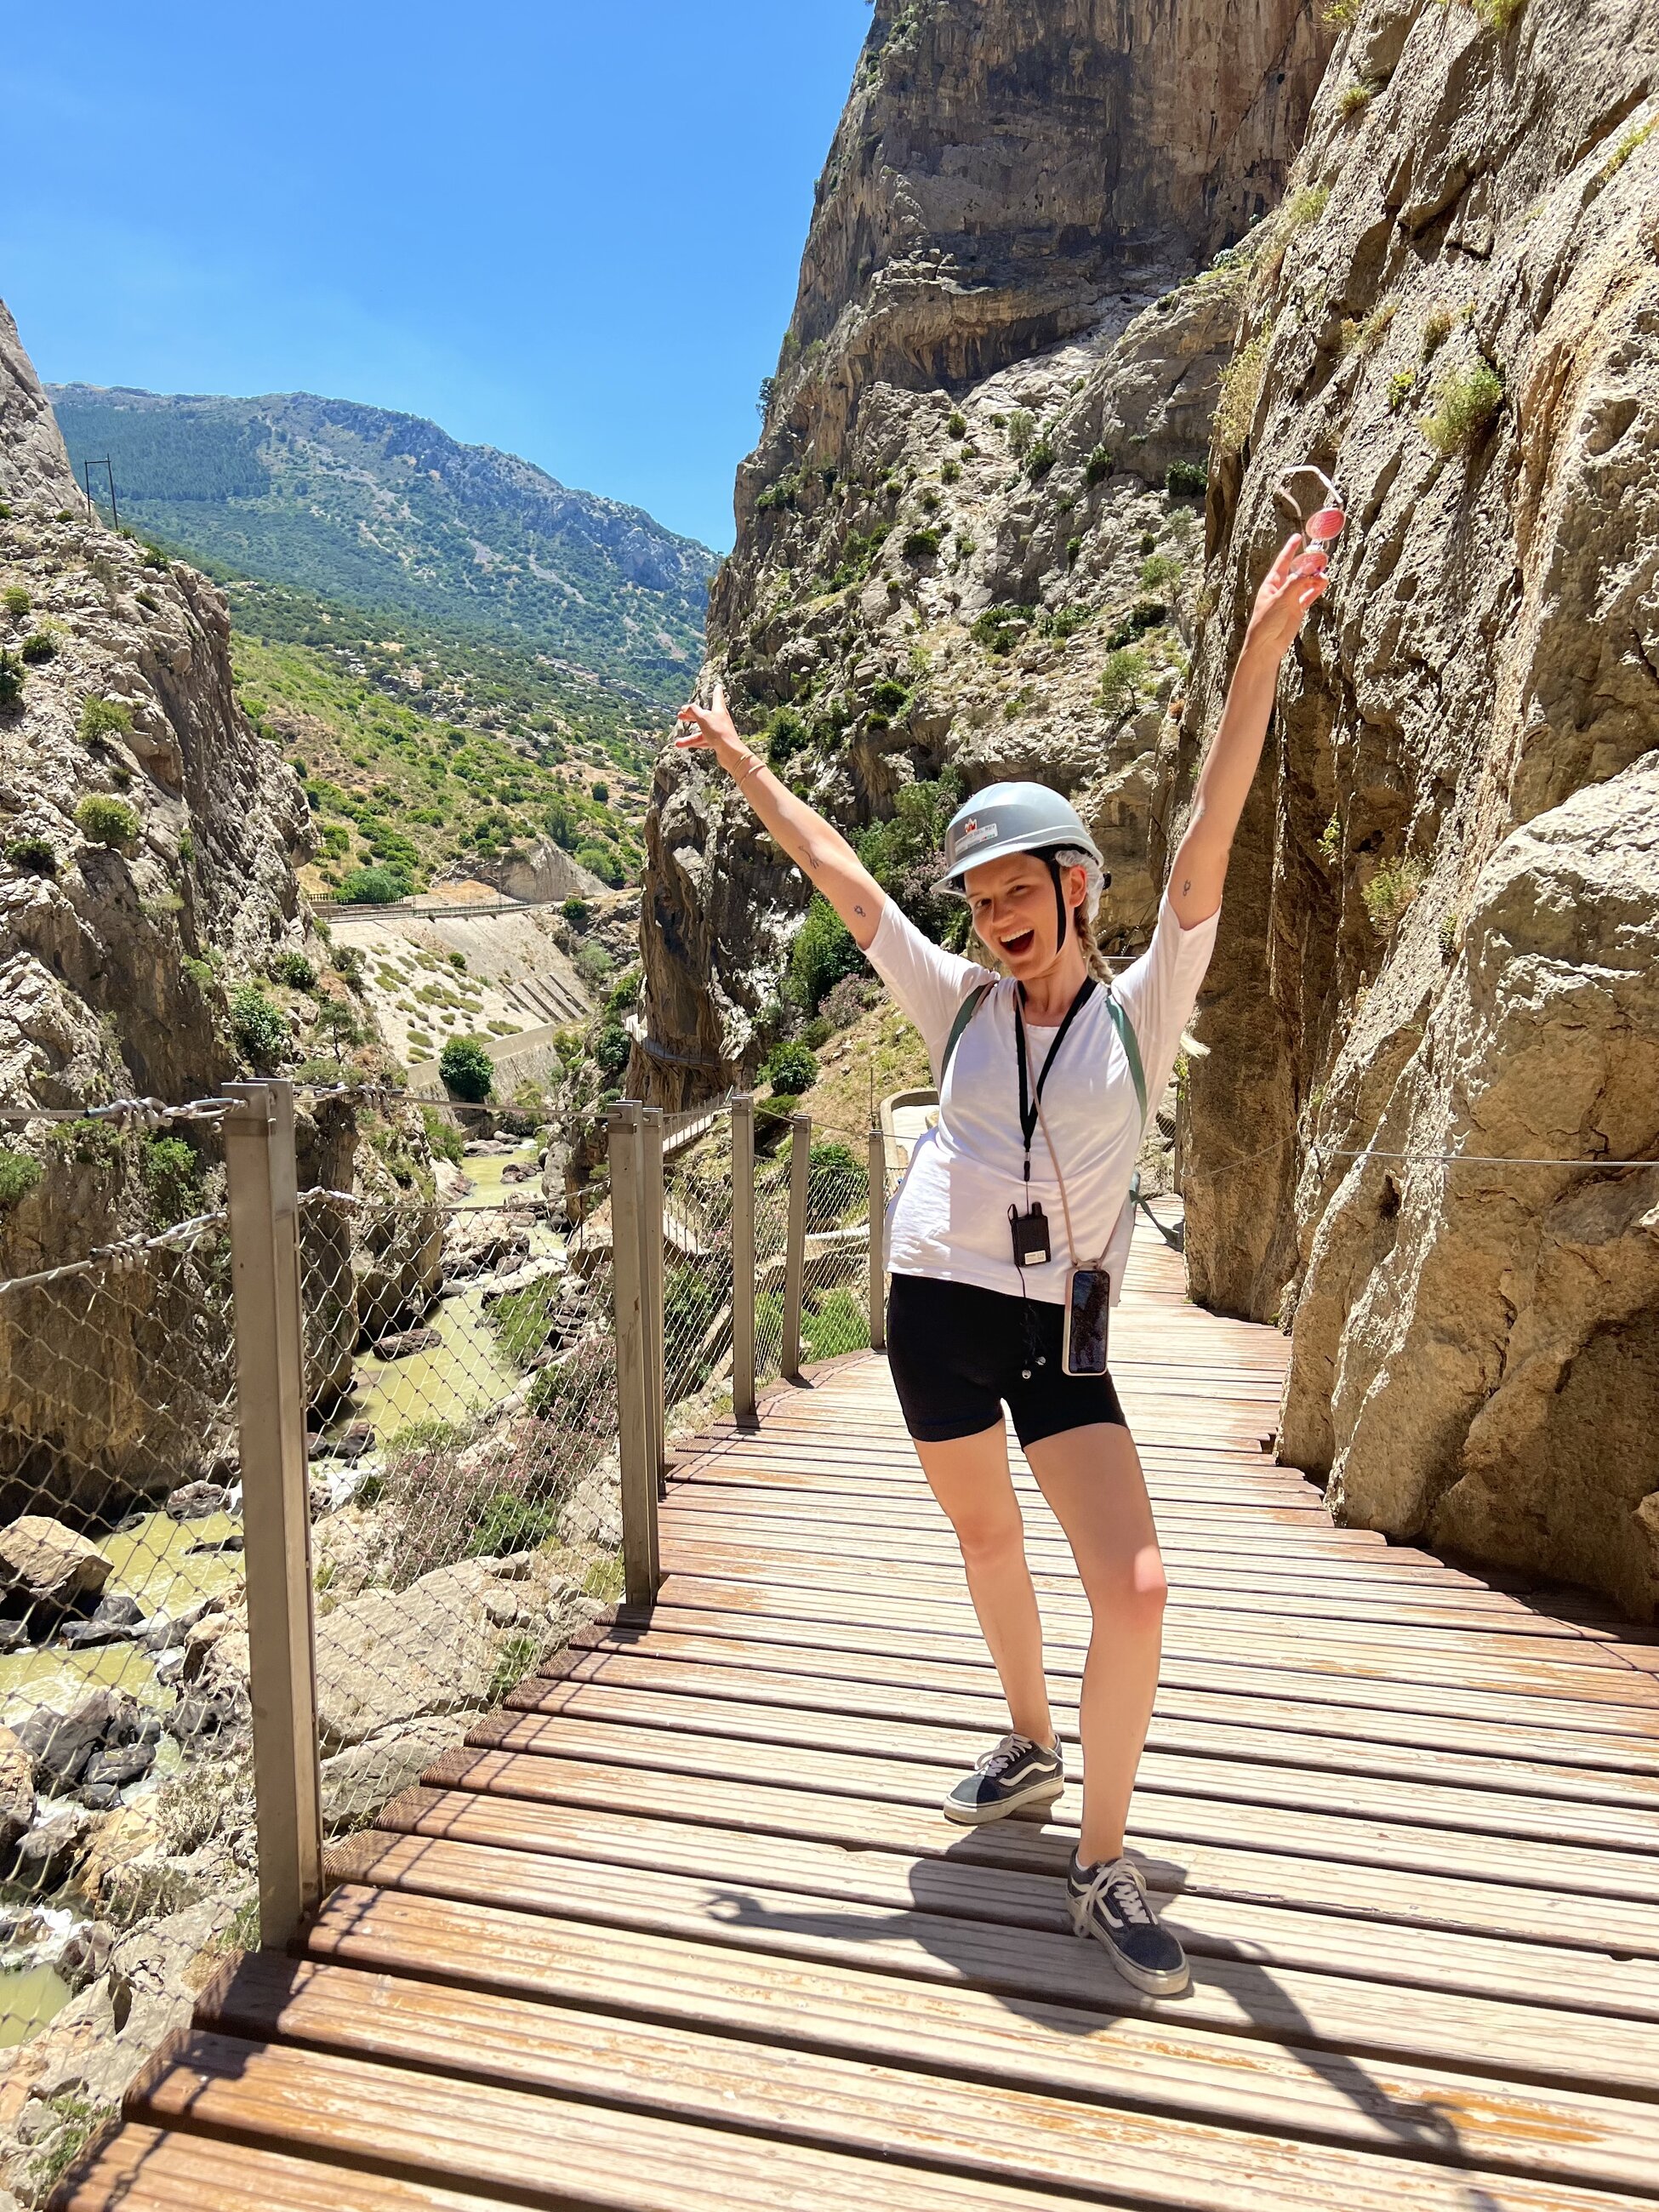 Making friends from all over the world while hiking El Camino del Rey